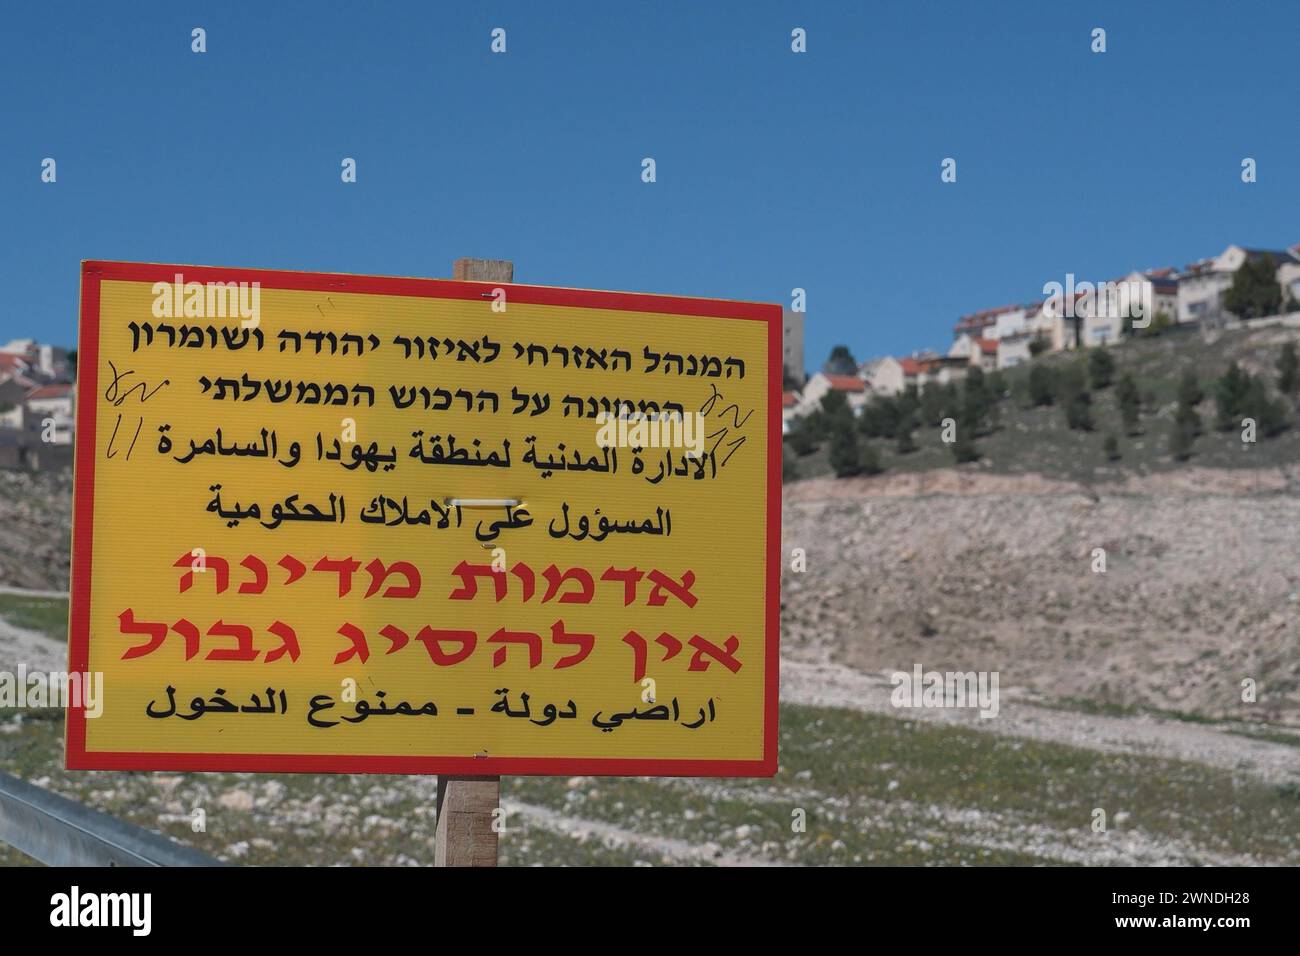 A sign that reads 'State lands must not be trespassed' placed by The Civil Administration, Israel's Governing Body in the West Bank, stands in the outskirts of the Israeli settlement of Ma'ale Adumim on February 29, 2024 in Ma'ale Adumim, West Bank. Israel Stock Photo